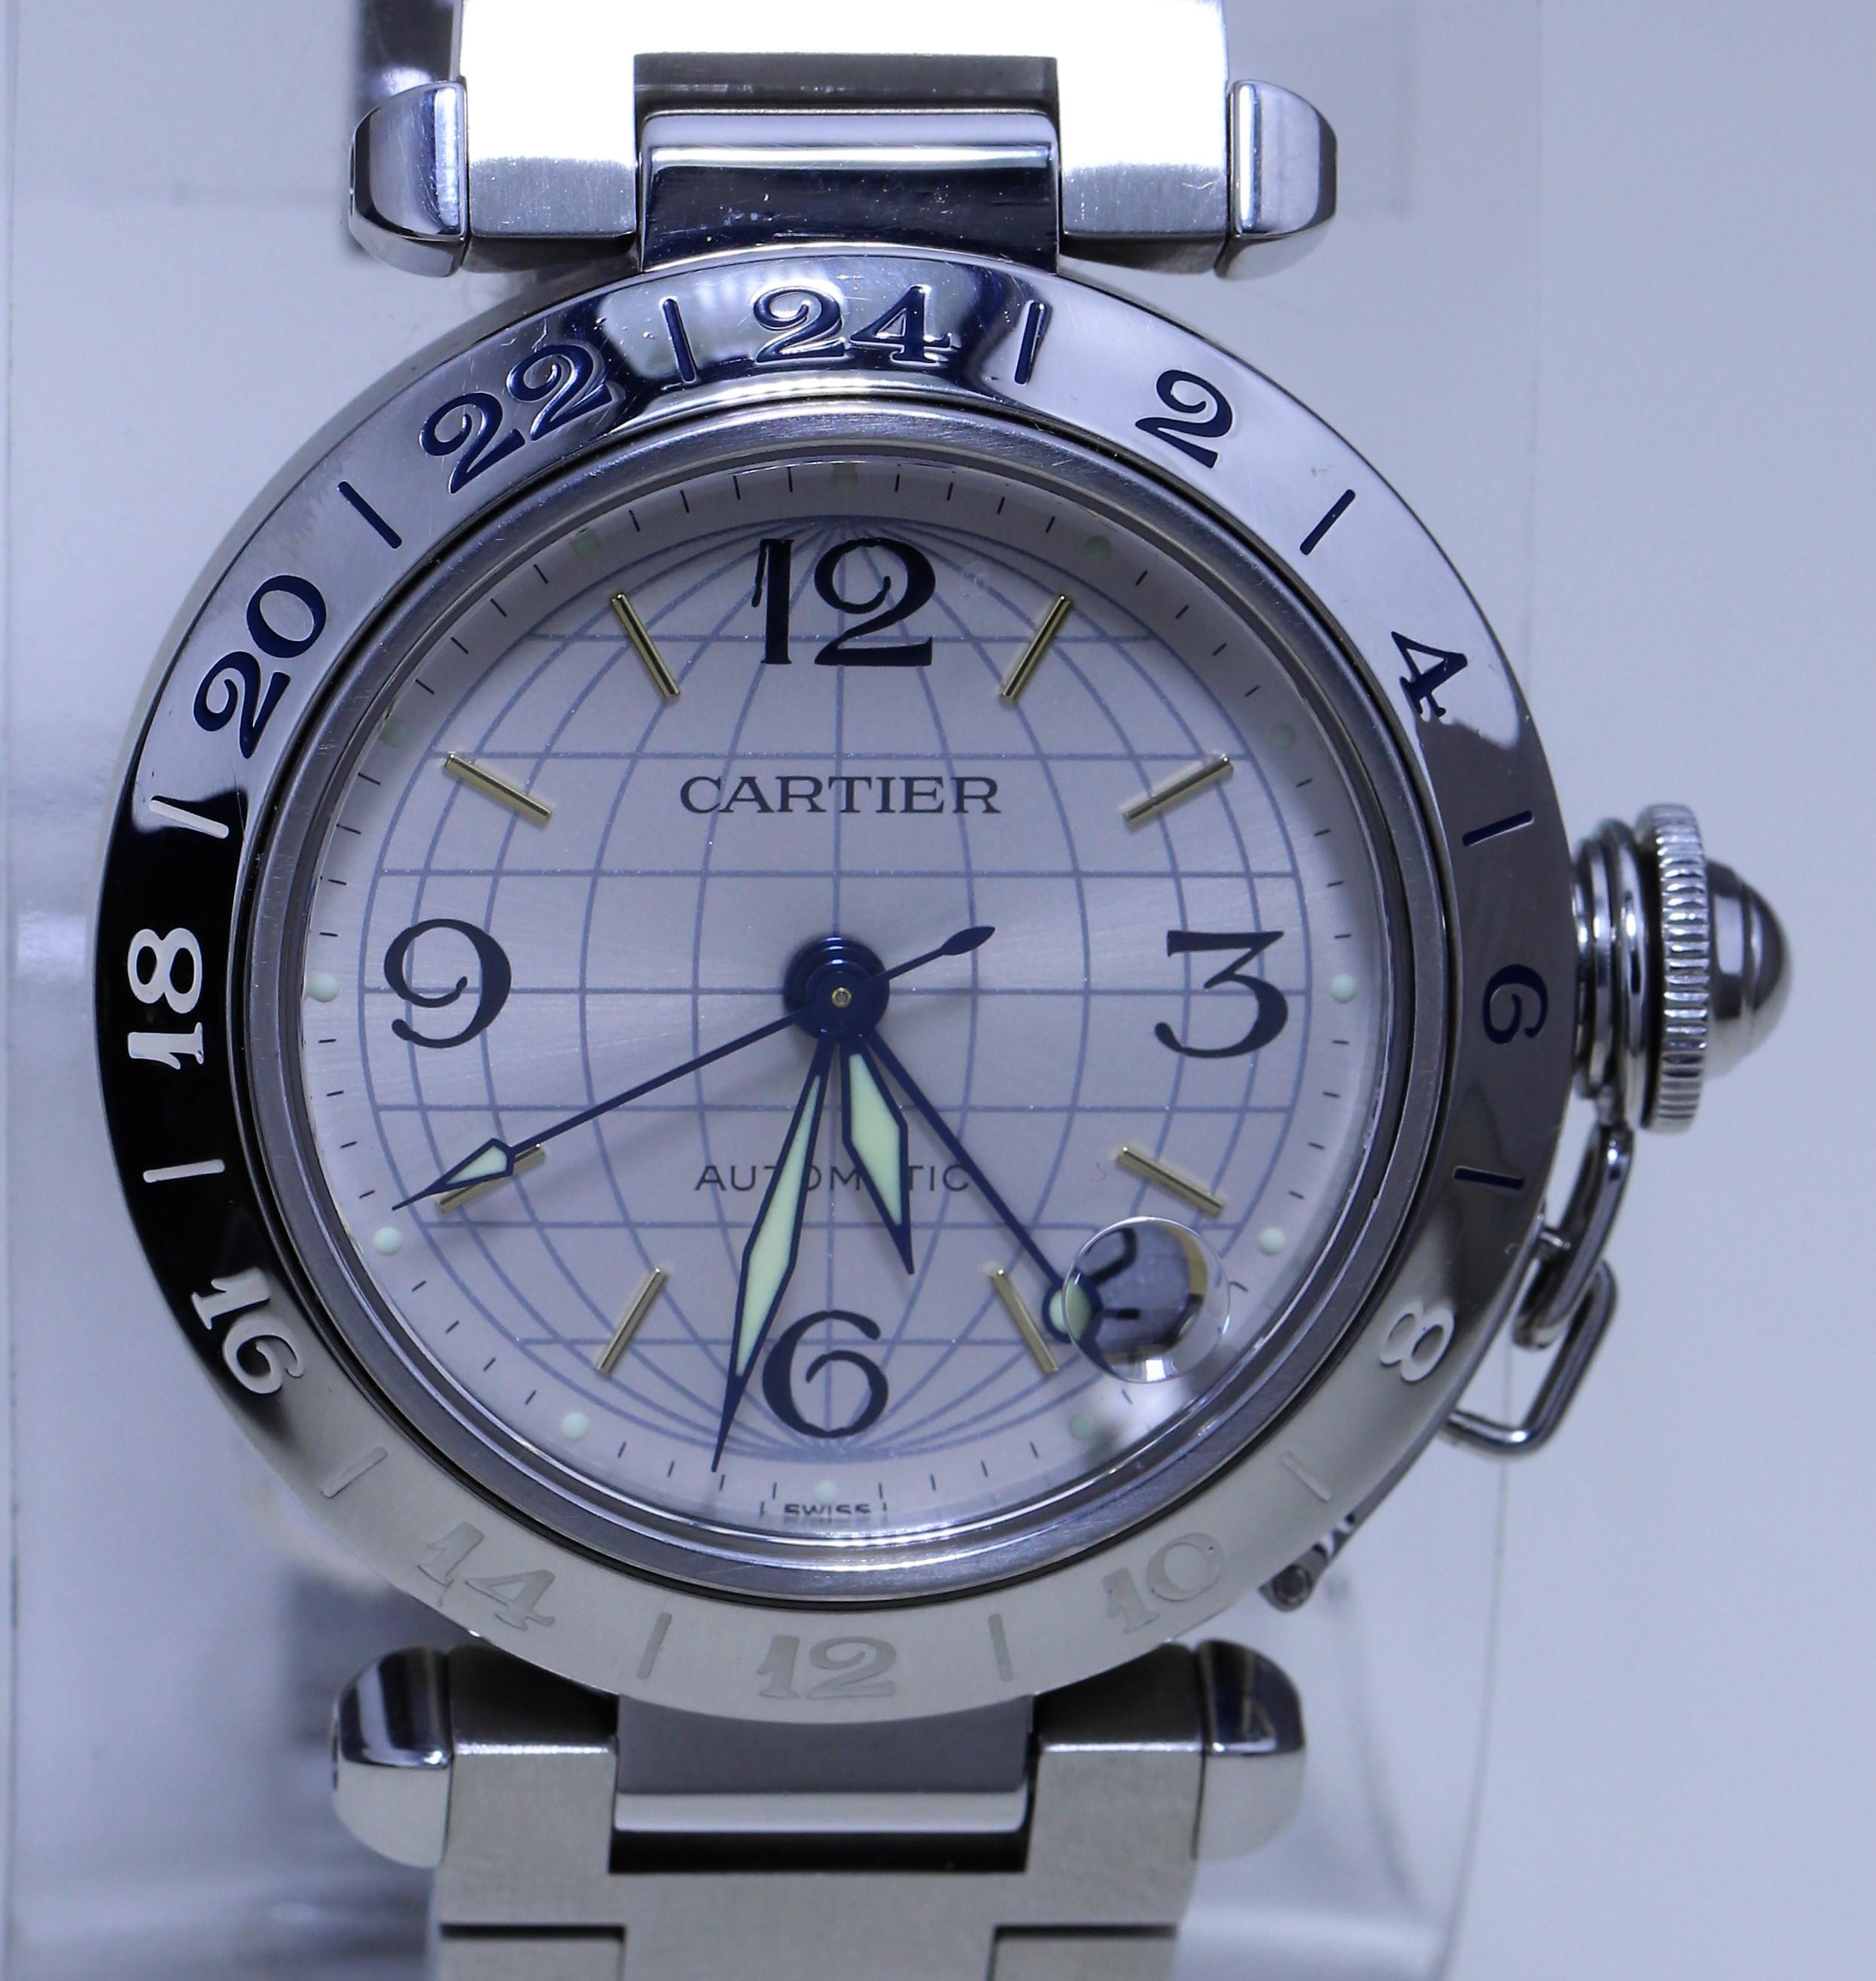 Cartier Stainless Steel Men's Watch In Good Condition For Sale In New York, NY